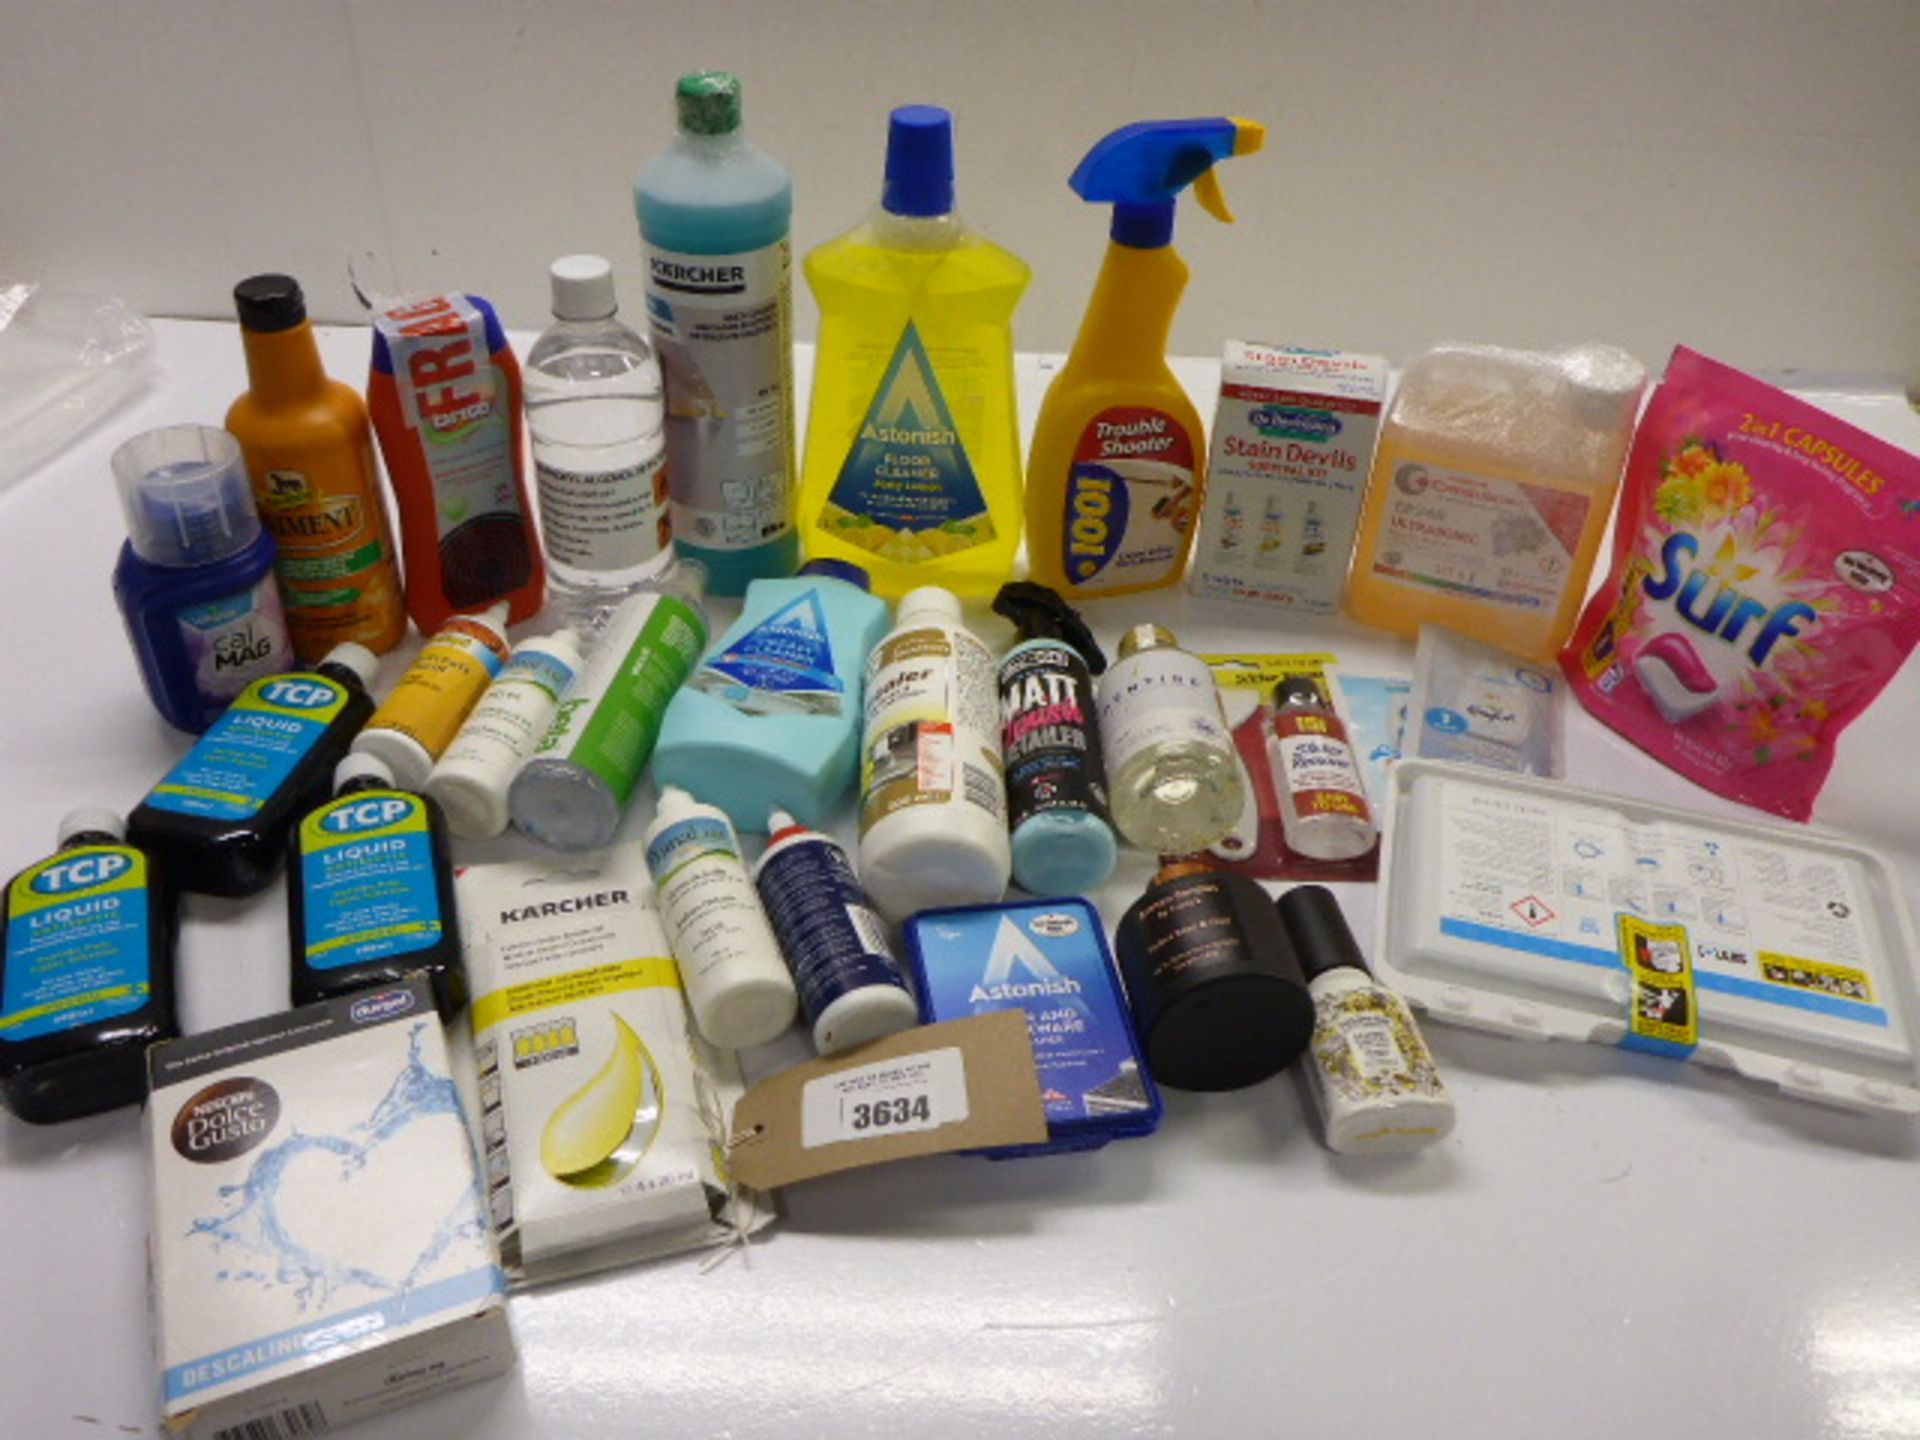 Selection of household cleaning products